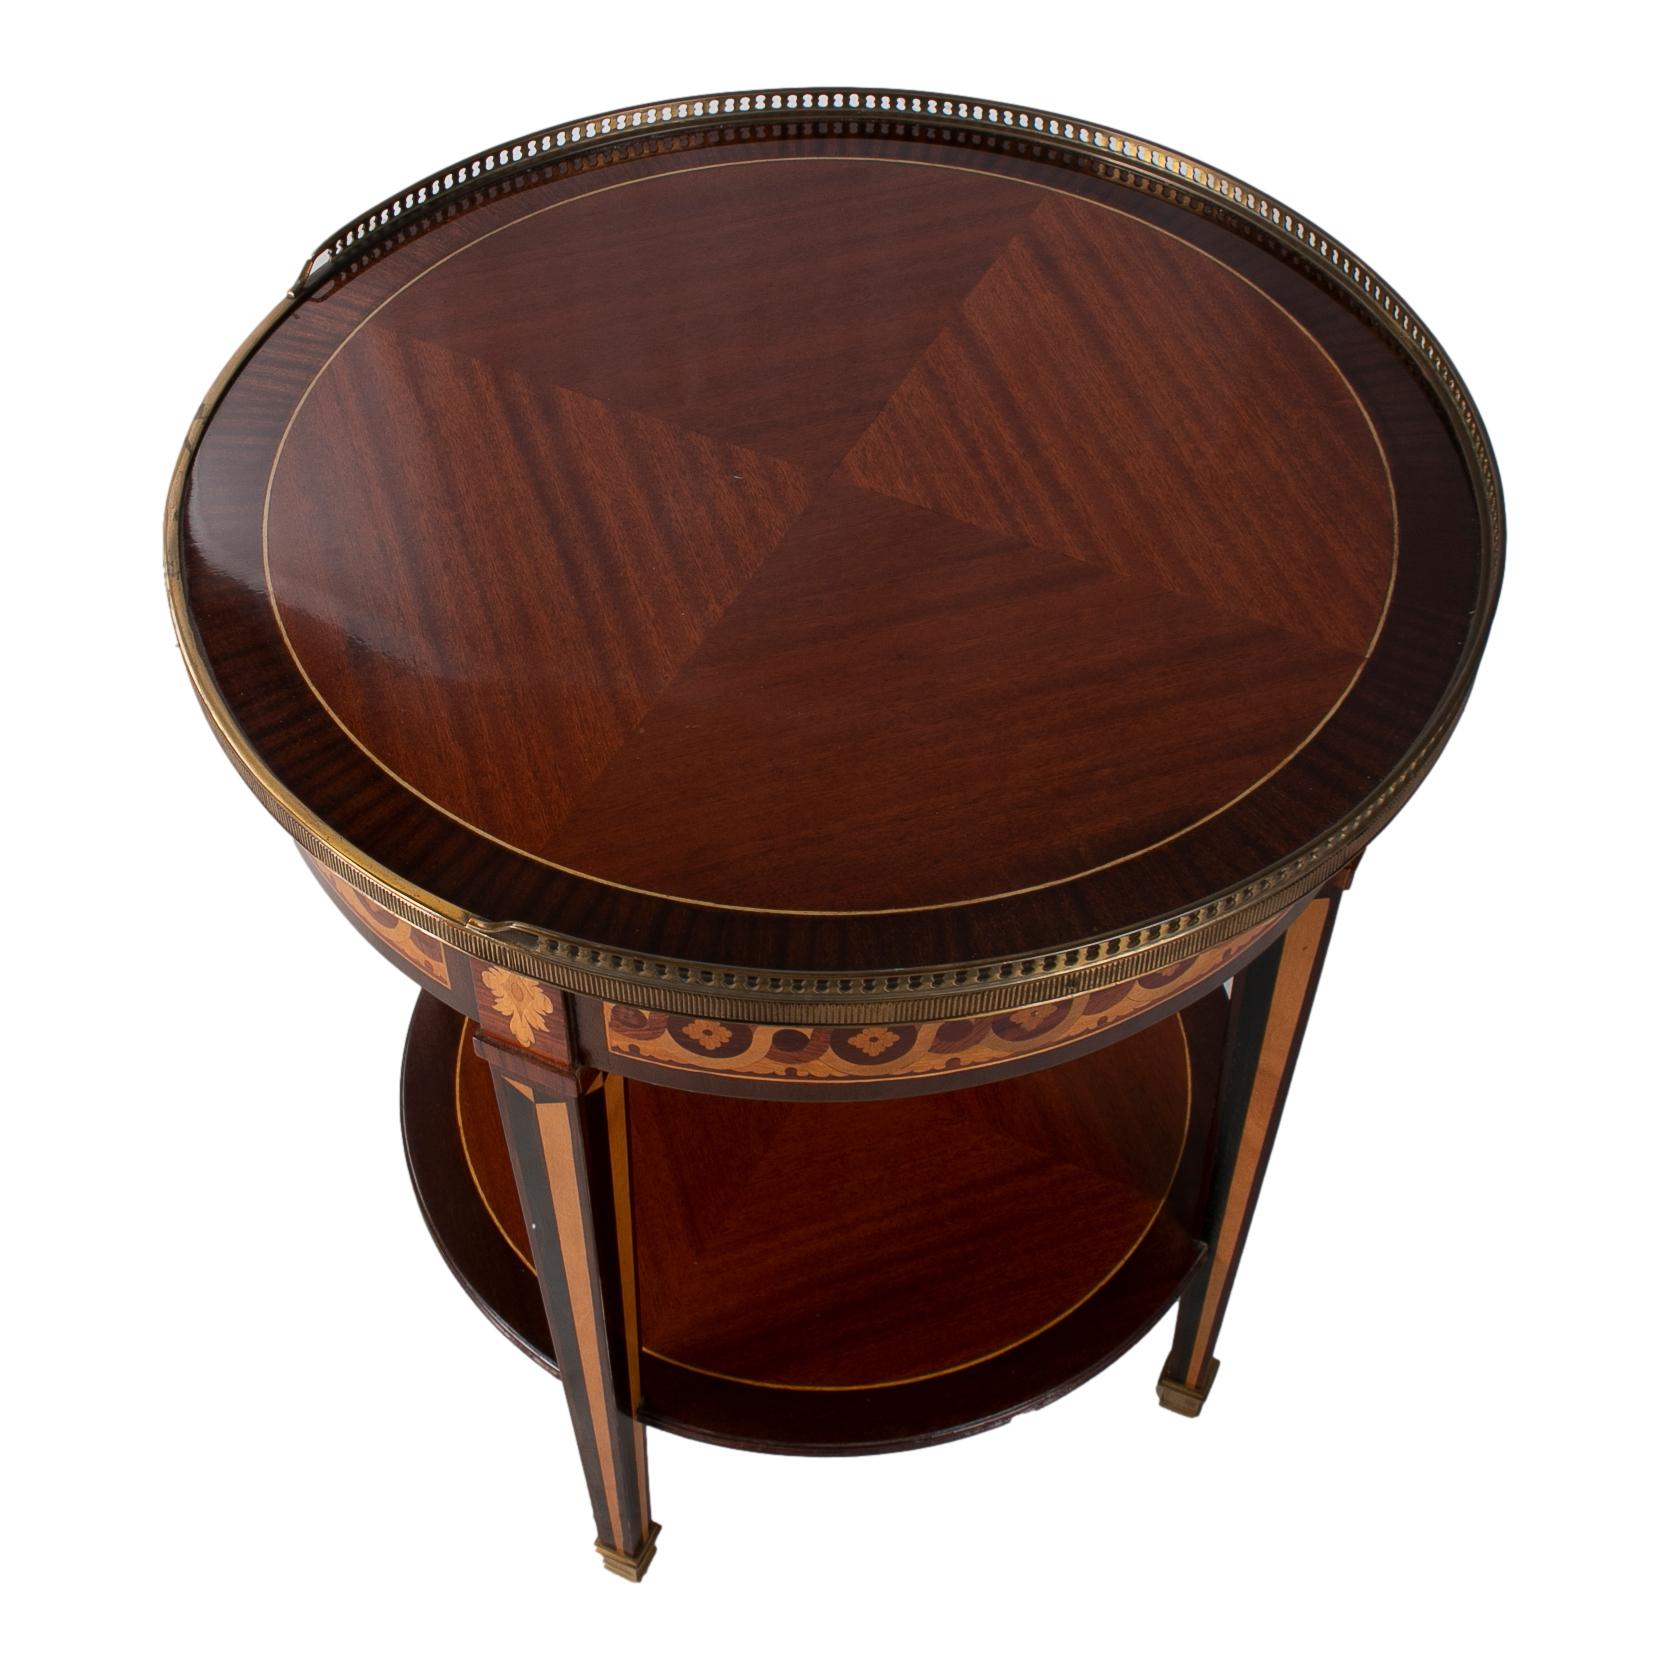 1980s French Mahogany Round Side Table w/ Bronze Decorations & Inlays For Sale 3